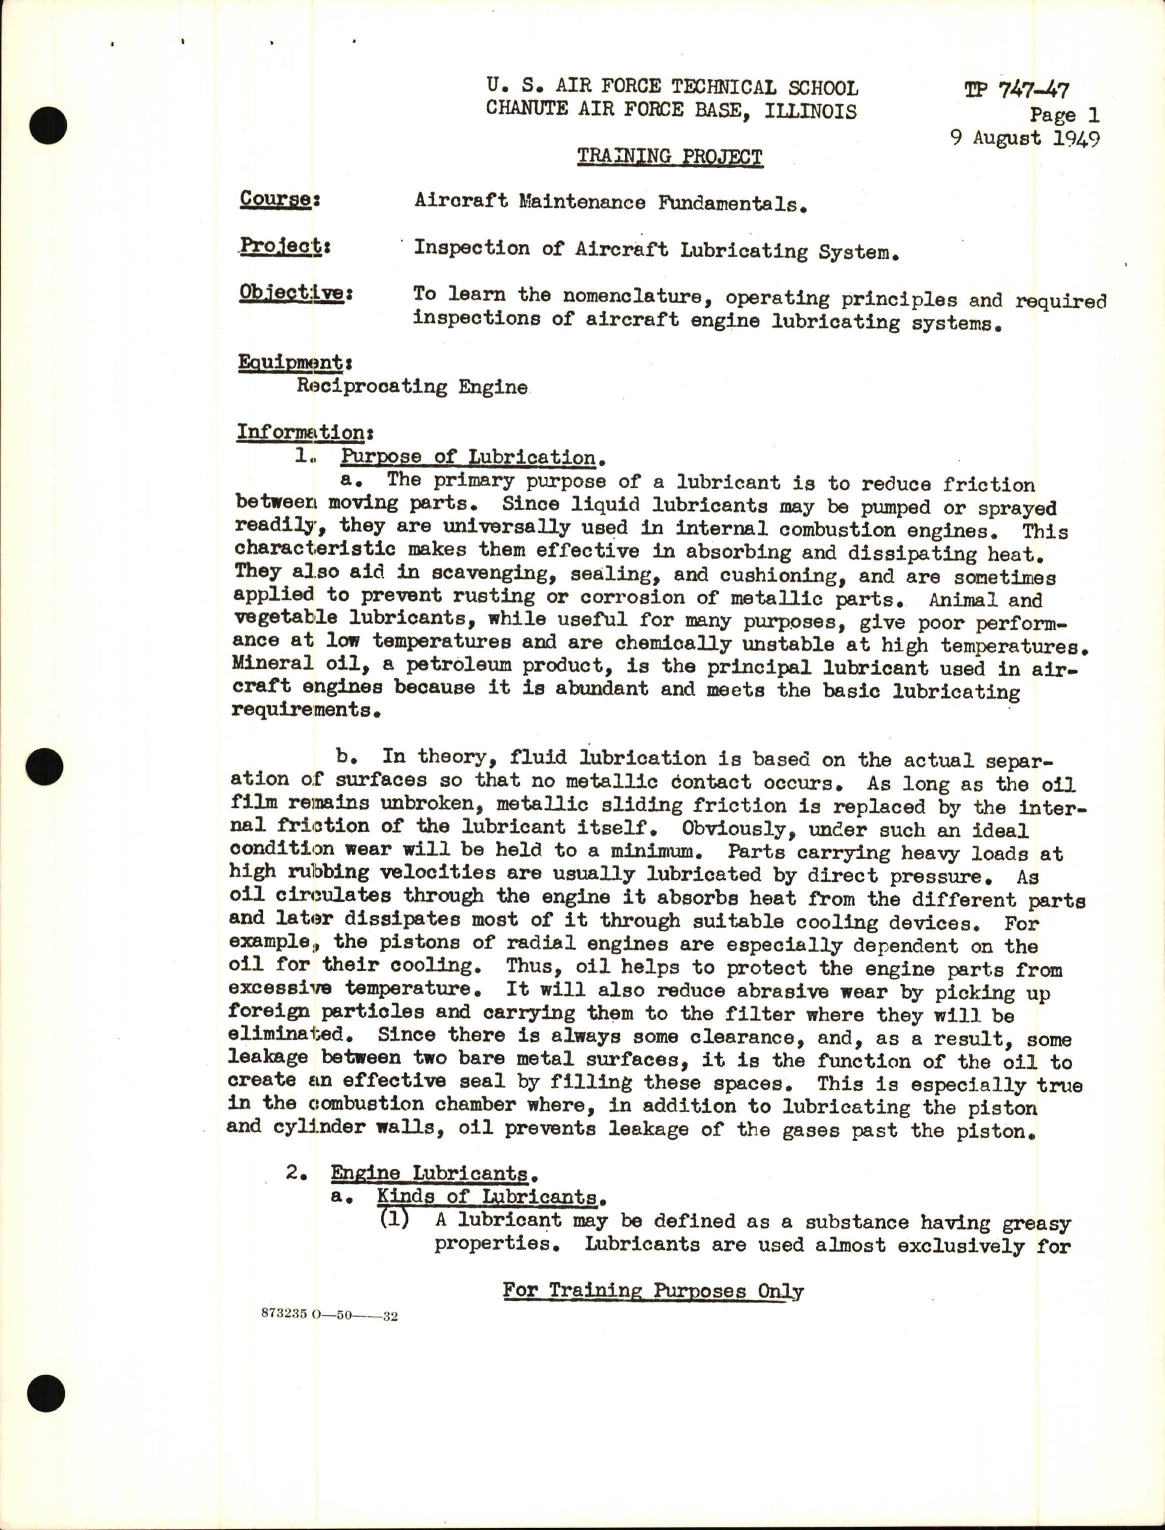 Sample page 1 from AirCorps Library document: Training Project, Inspection of Aircraft Lubricating System